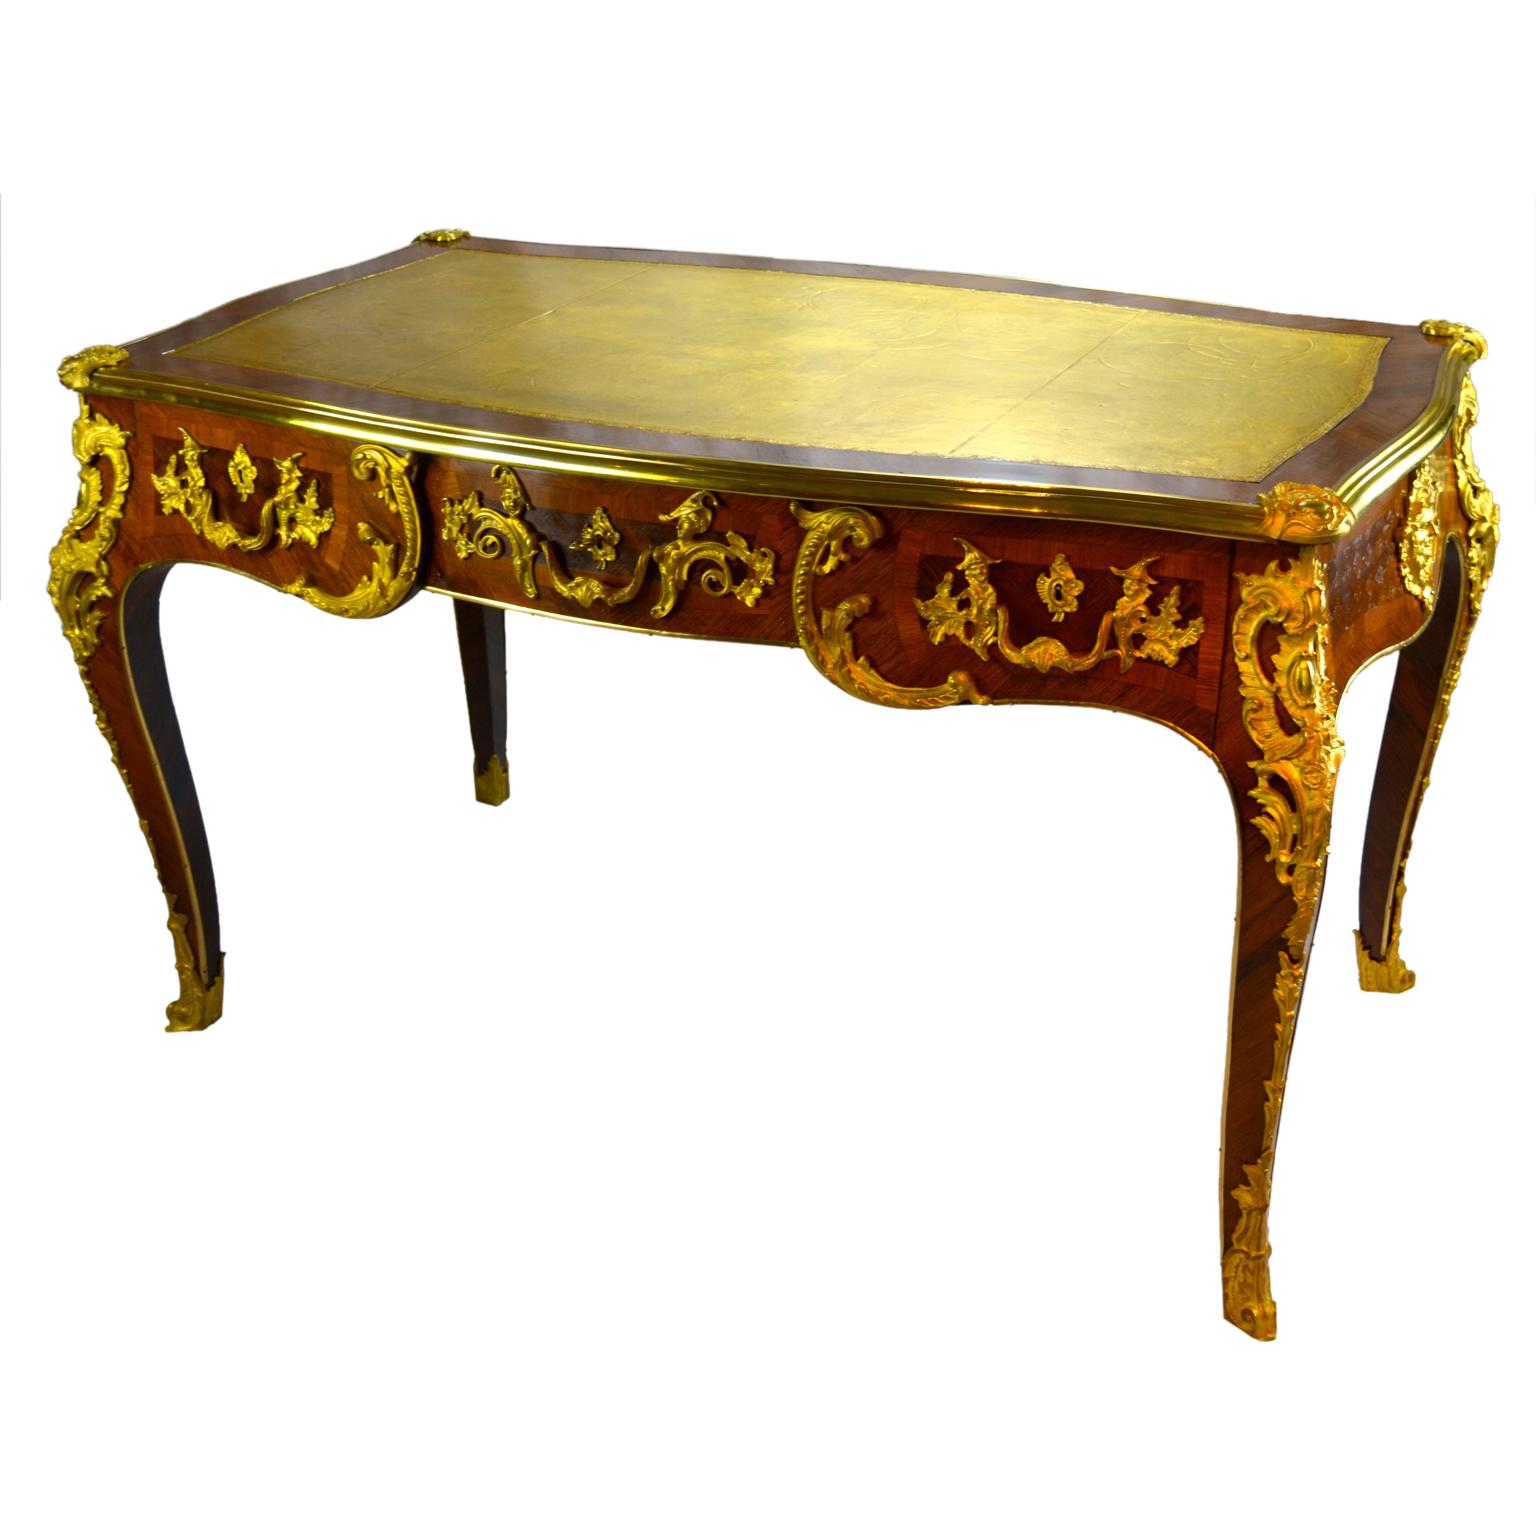 Louis XV Style French Kingwood Parquetry and Gilt Bronze Bureau Plat 'Desk' In Good Condition For Sale In Vancouver, British Columbia